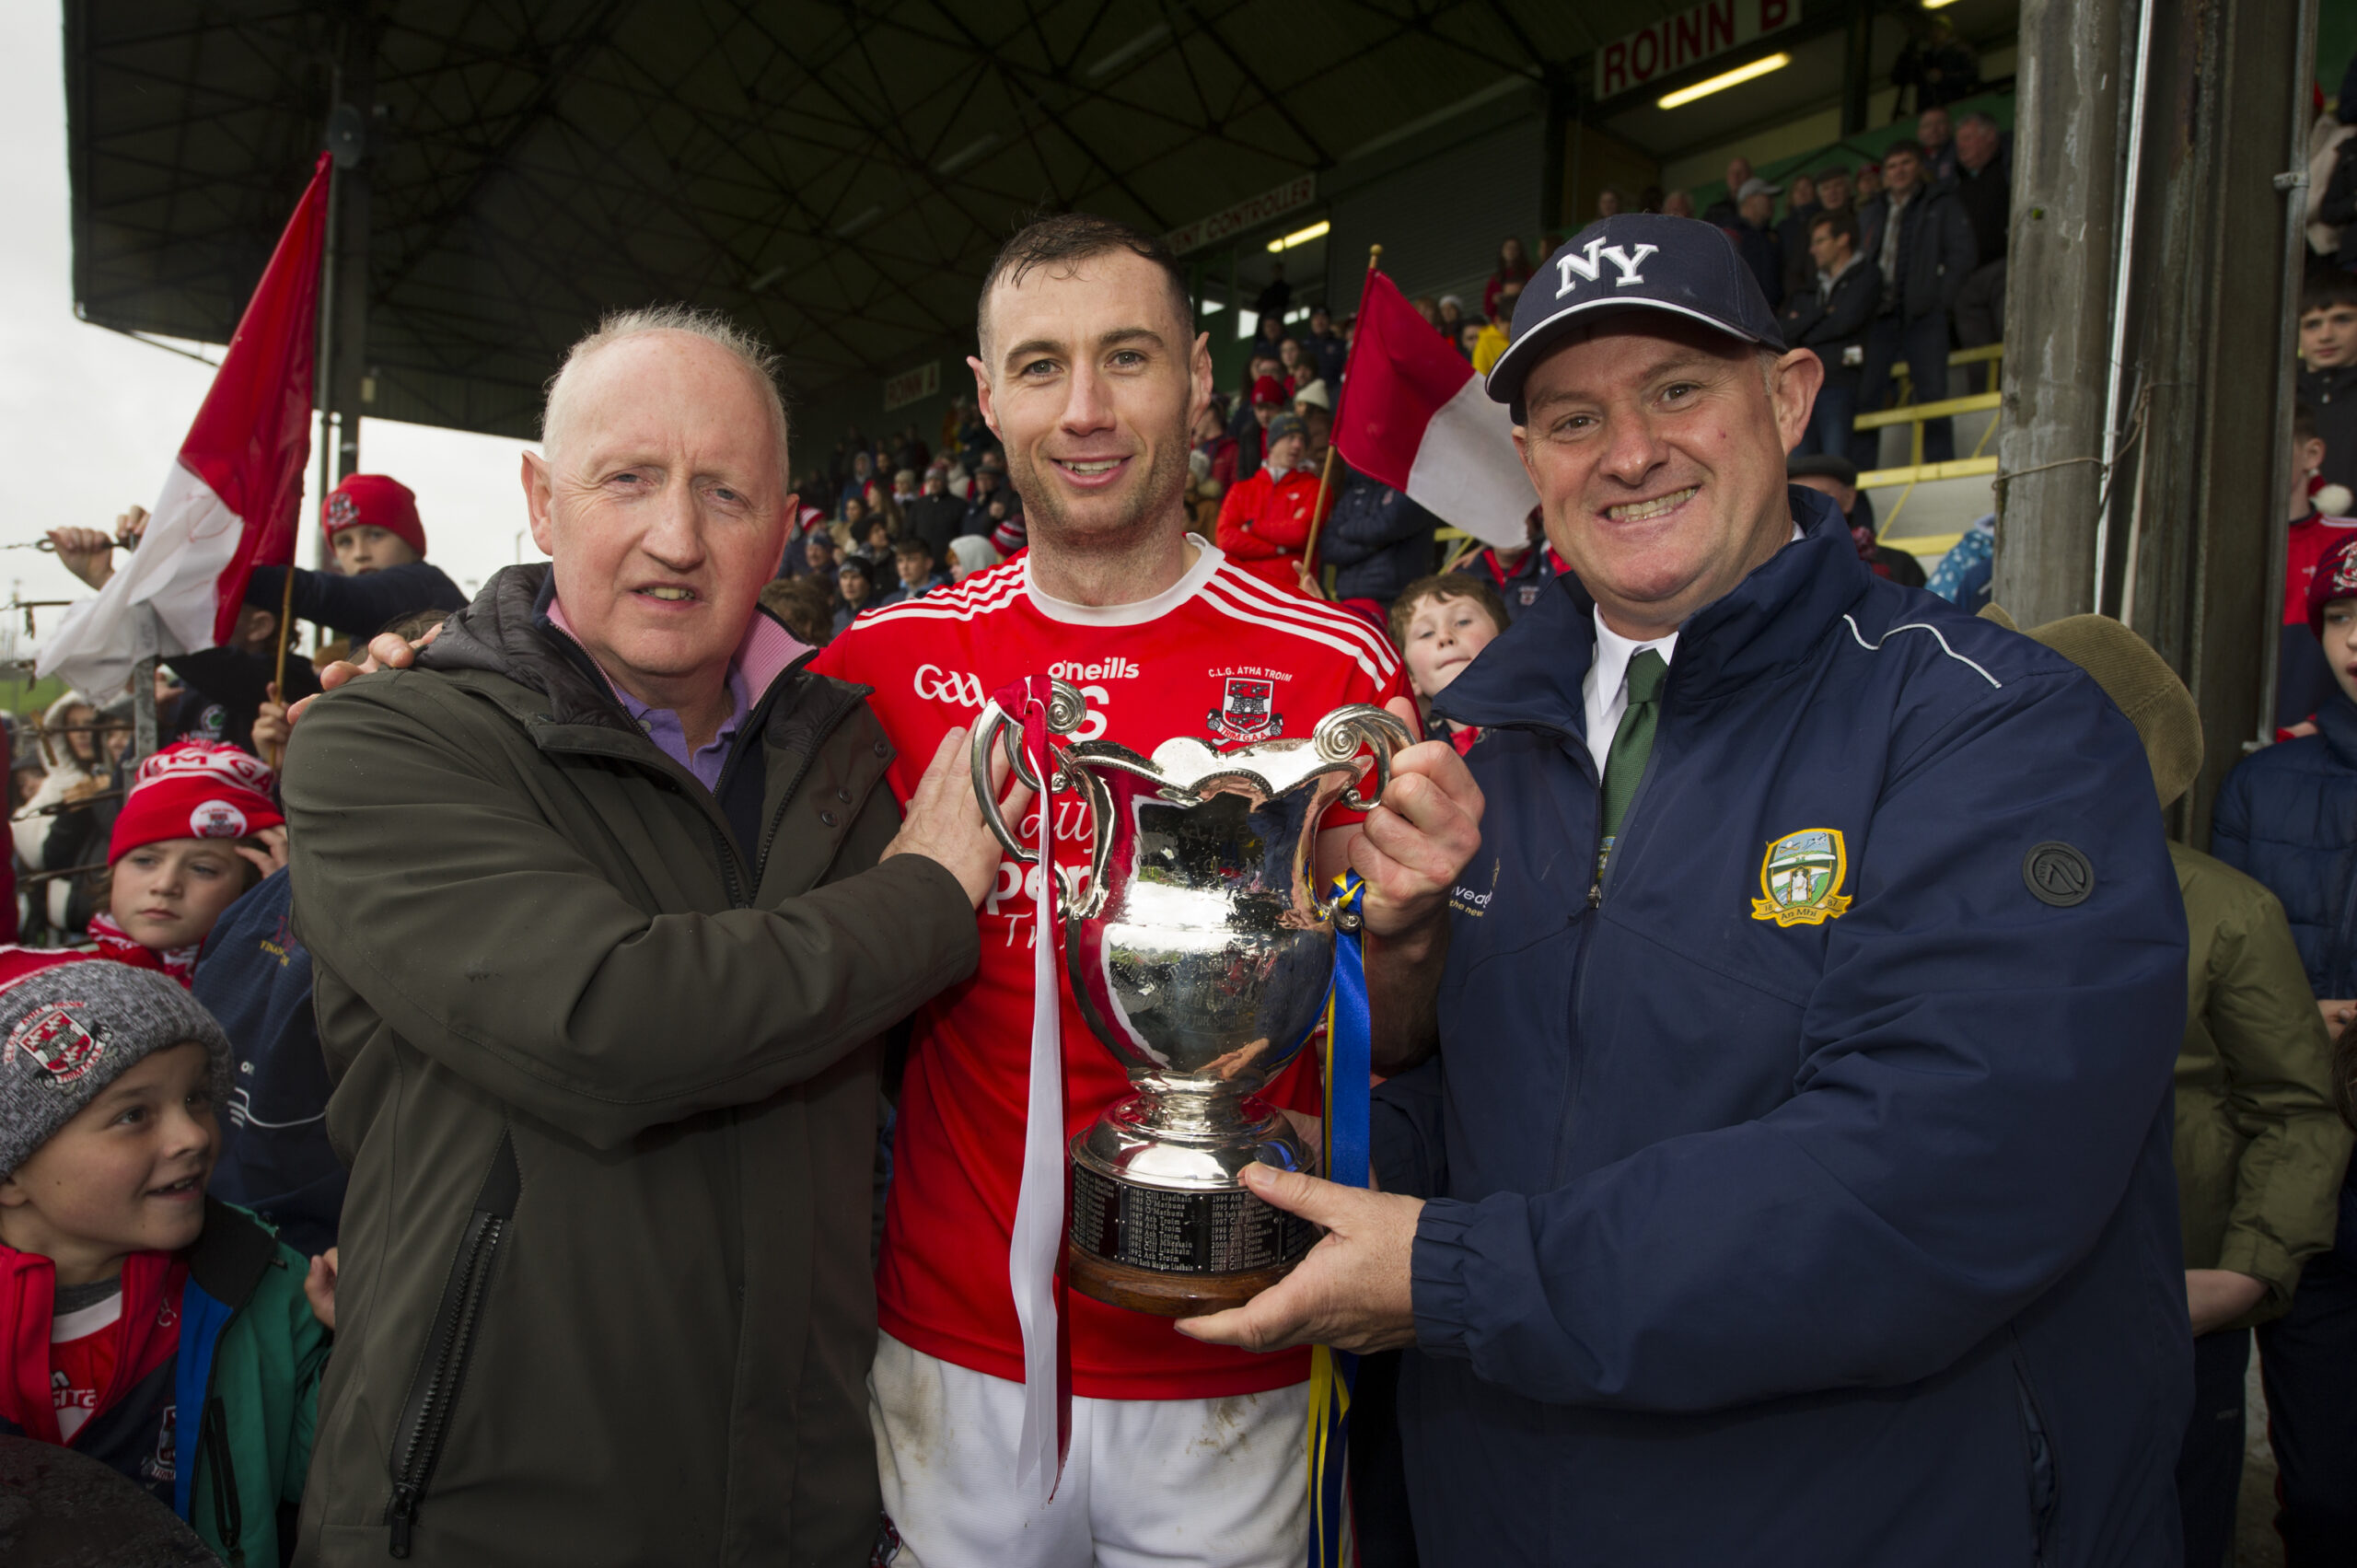 Club Hurling Championship Fixtures Revealed